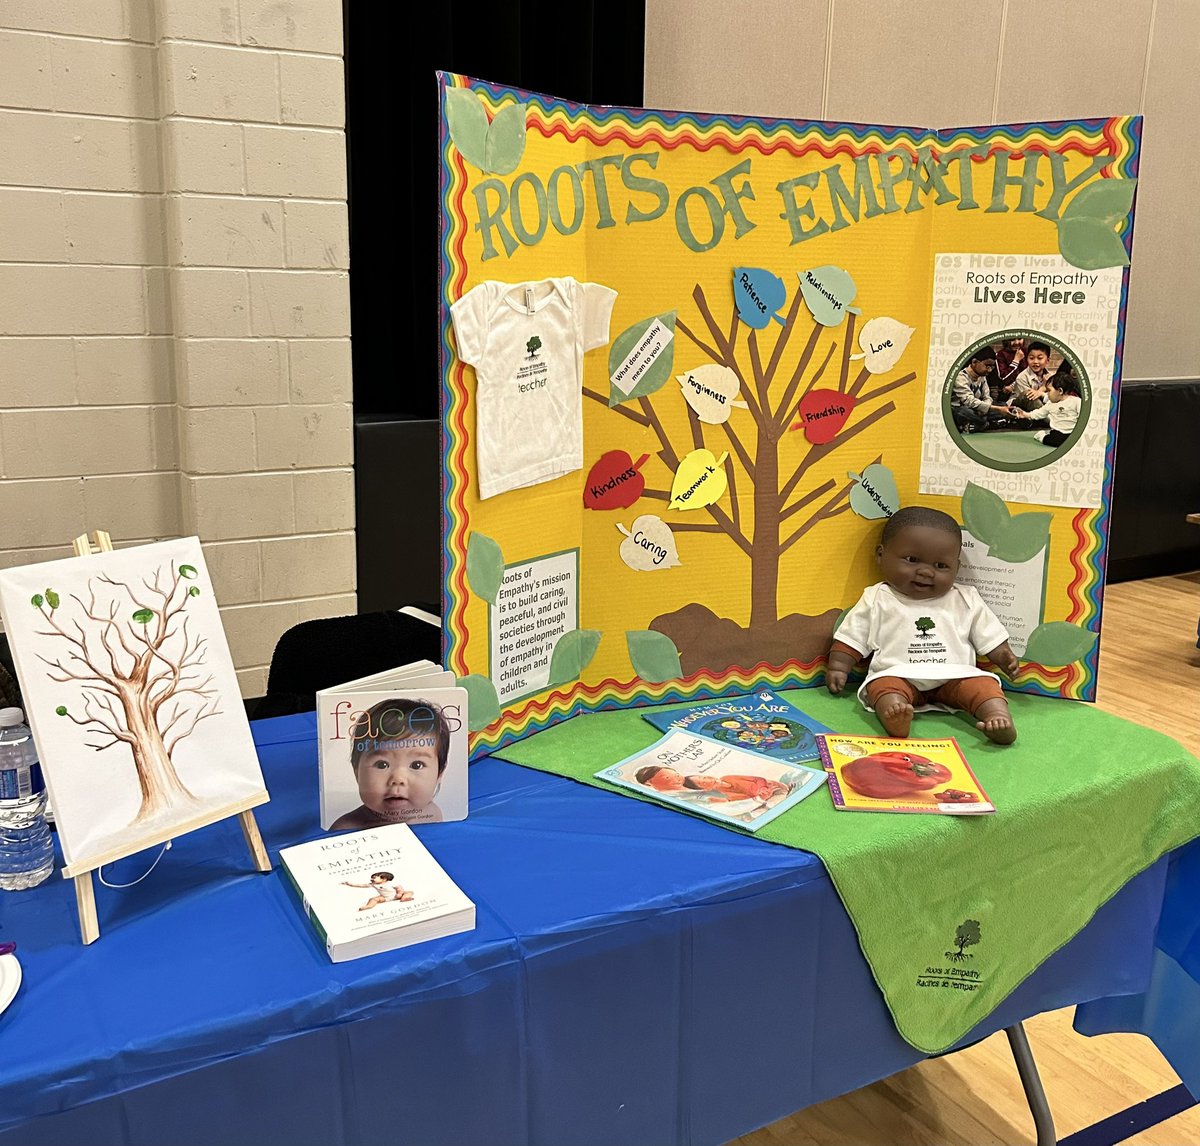 All set up at @QHMilton for #BellLetsTalkDay. Sharing information with students about how Tier 1 programs like @RootsofEmpathy support children’s mental health & well-being @HCDSB @GBrown64 @StephanyBalogh